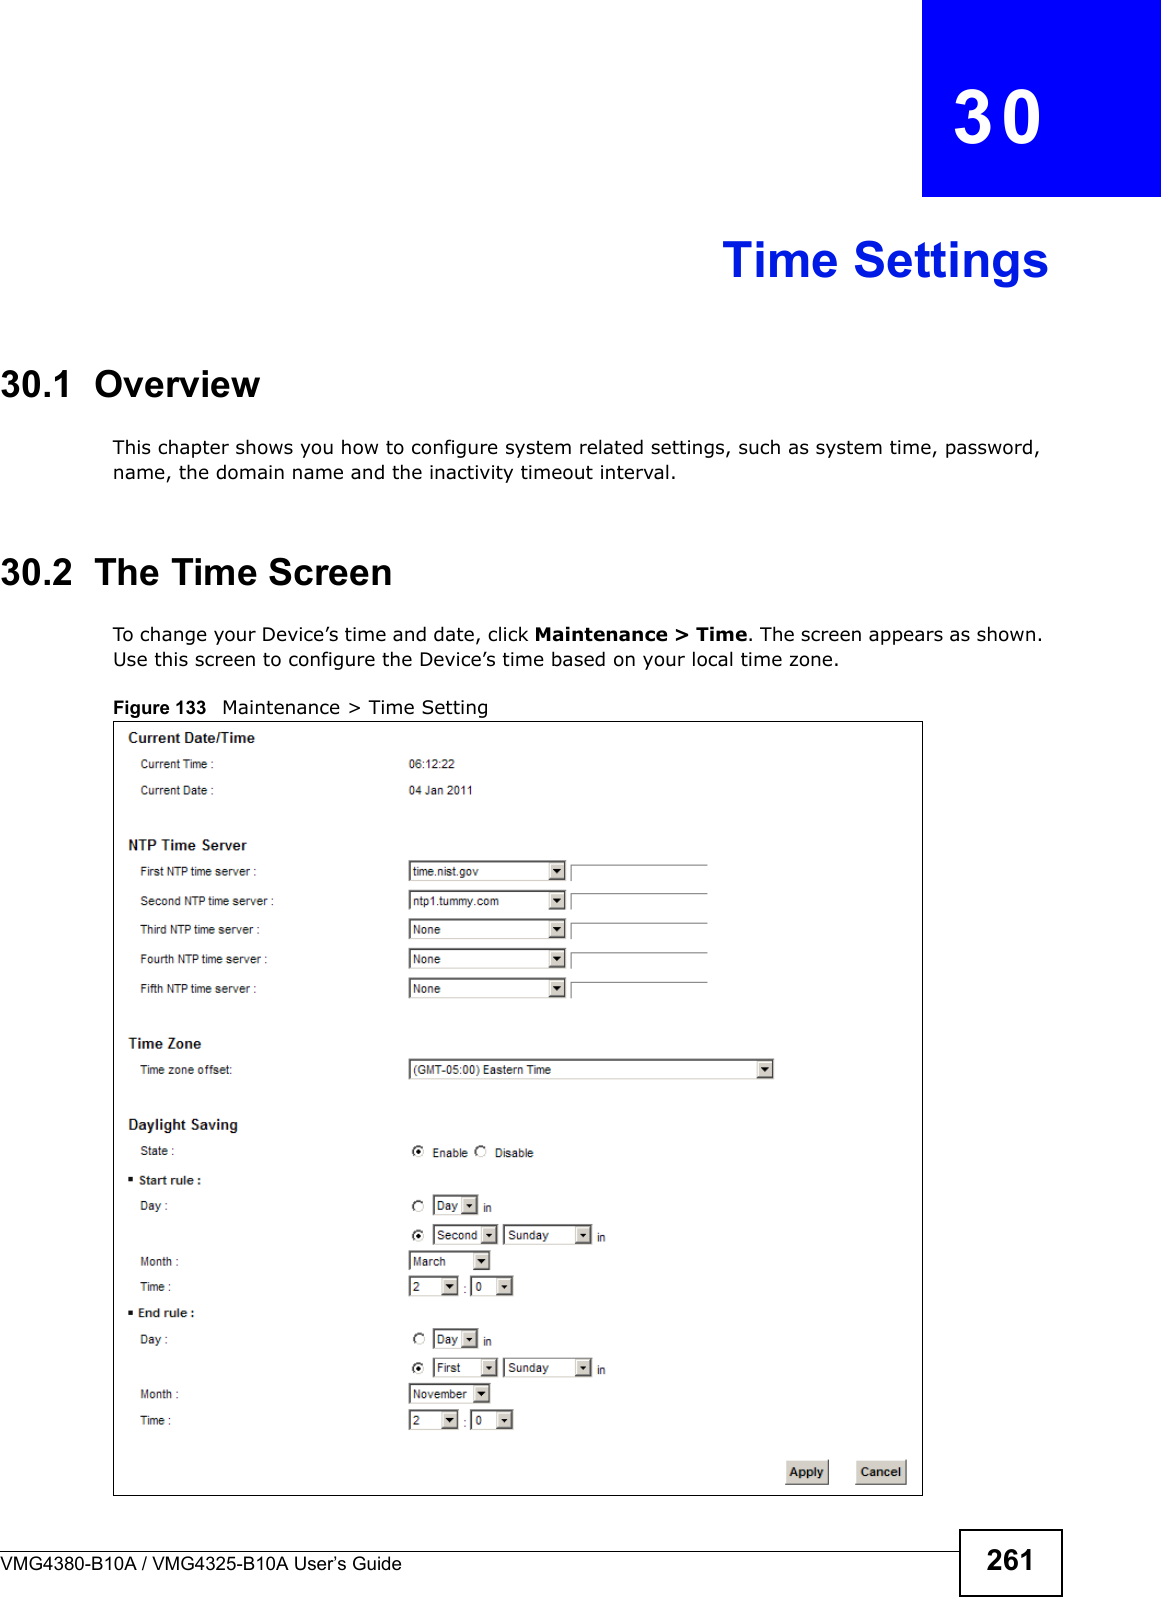 VMG4380-B10A / VMG4325-B10A User’s Guide 261CHAPTER  30Time Settings30.1  OverviewThis chapter shows you how to configure system related settings, such as system time, password, name, the domain name and the inactivity timeout interval.   30.2  The Time Screen To change your Device’s time and date, click Maintenance &gt; Time. The screen appears as shown. Use this screen to configure the Device’s time based on your local time zone.Figure 133   Maintenance &gt; Time Setting